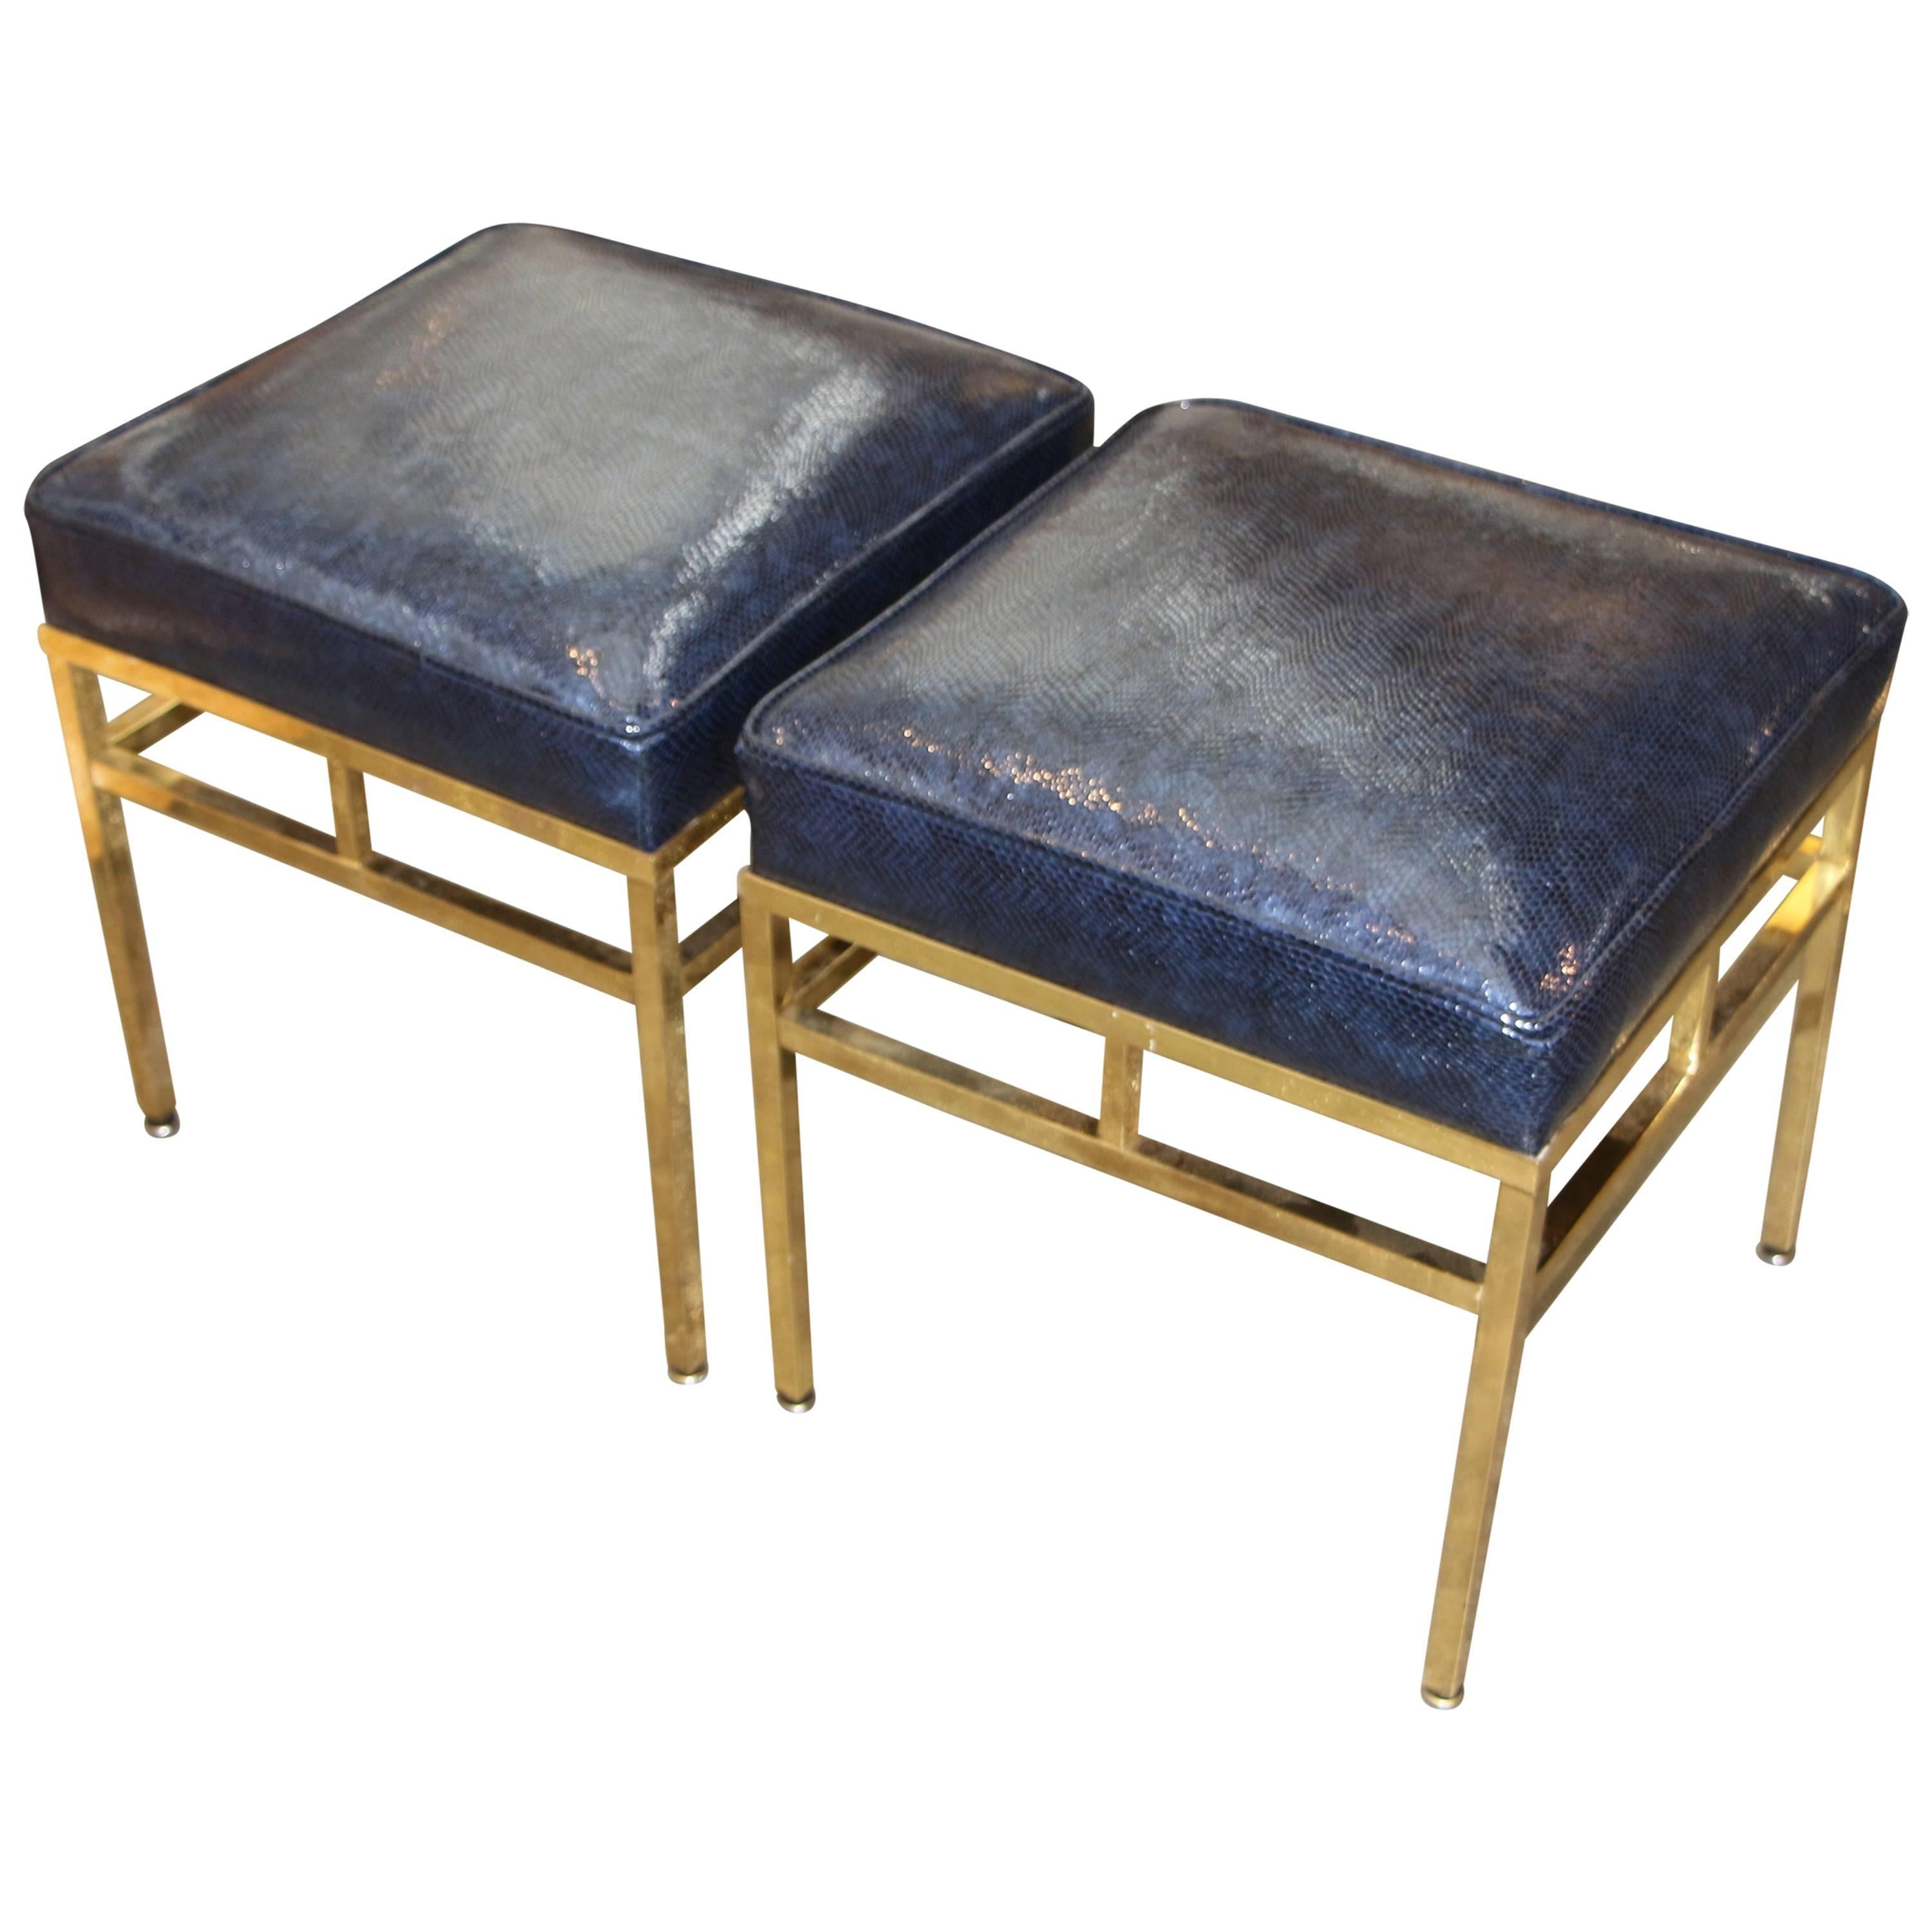 Faux Lizard or Snake Leather Topped Brass Ottomans